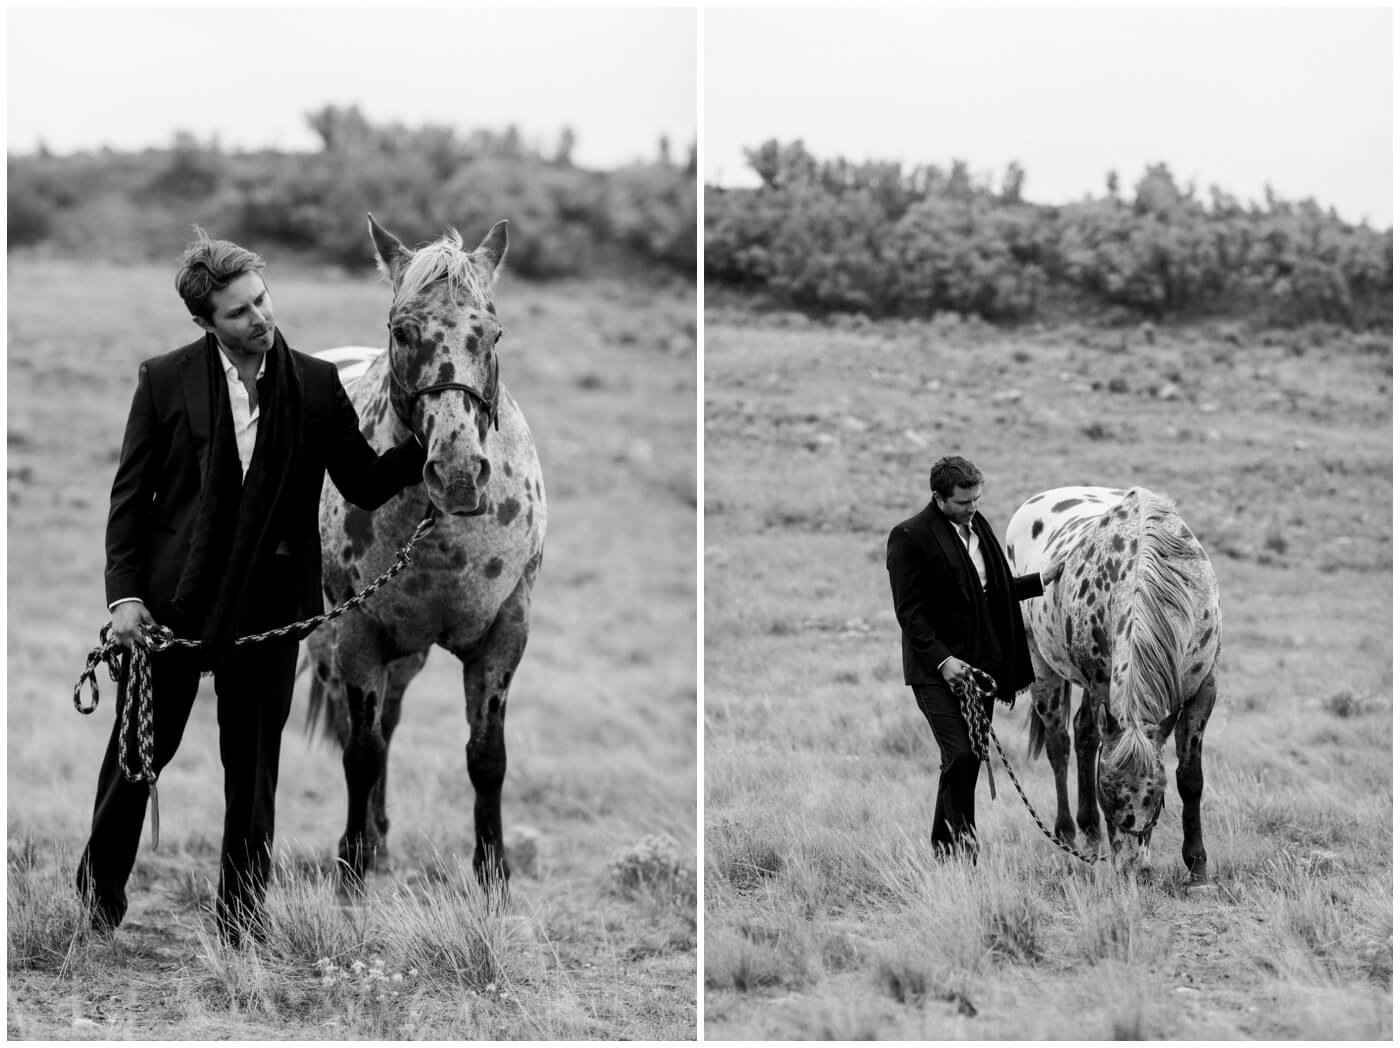 Wedding in the mountains | A groom stands with his horse in the Utah mountains